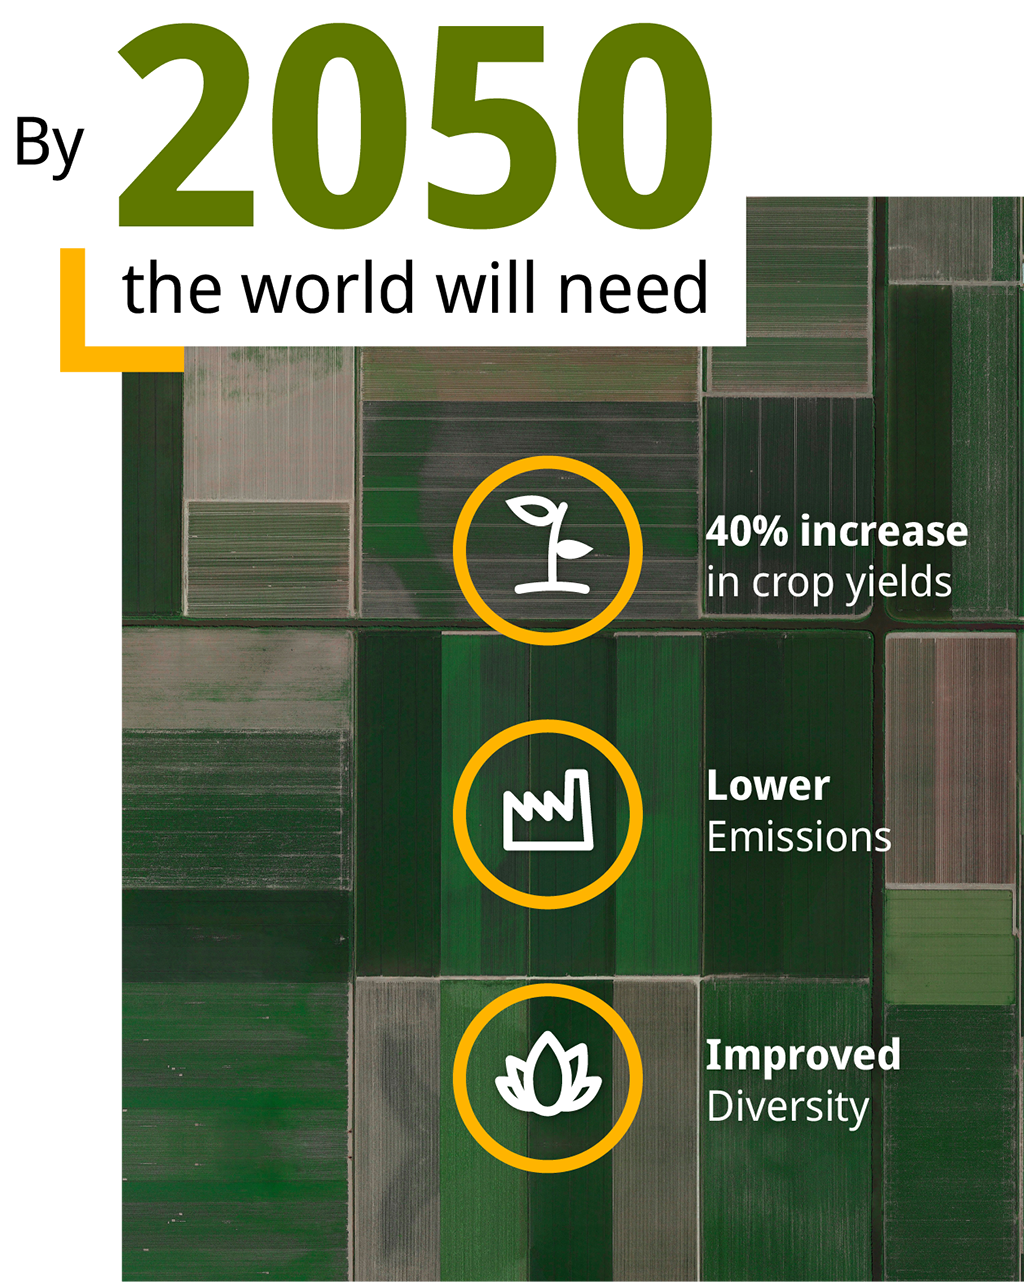 Icons and stats: By 2050 the world will need, 40% increase in crop yields, lower emissions and improved diversity